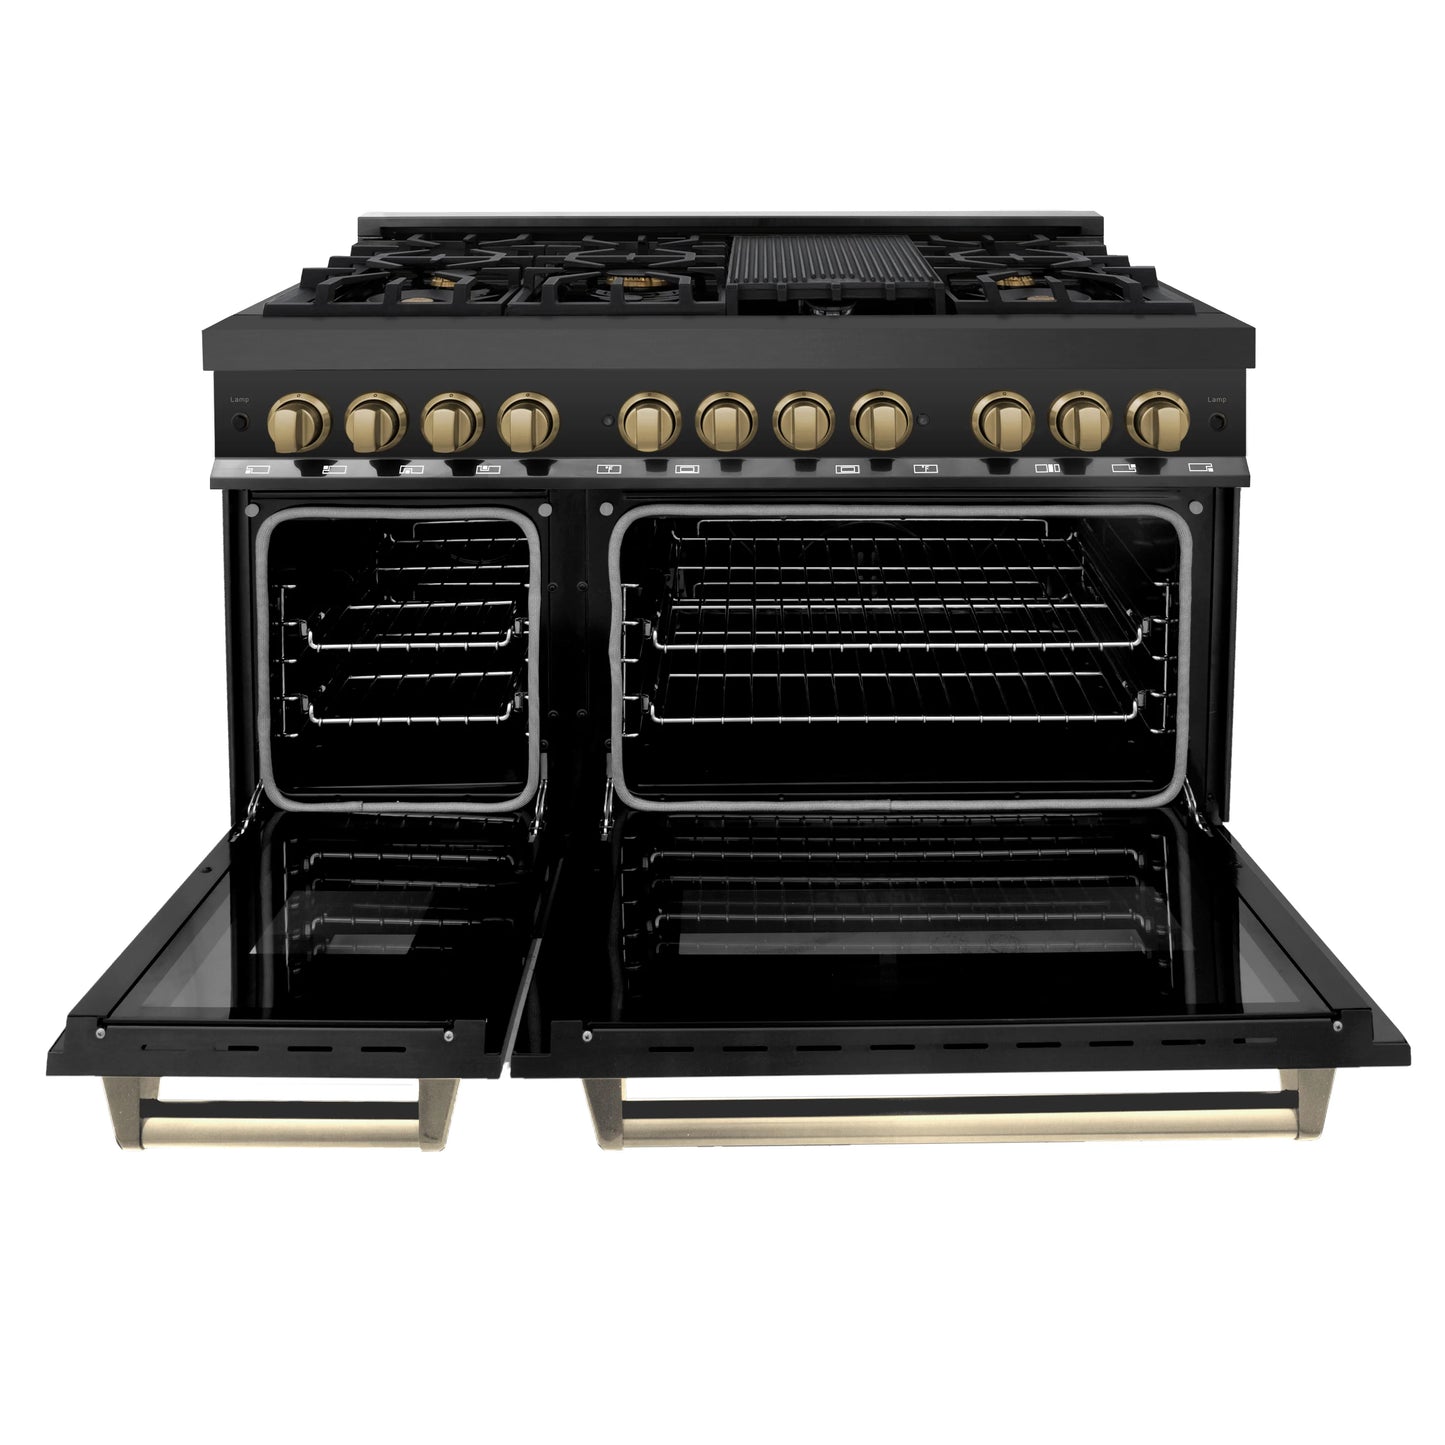 ZLINE Autograph Edition 48 in. Dual Fuel Range with Gas Stove and Electric Oven in Black Stainless Steel with Champagne Bronze Accents (RABZ-48-CB)